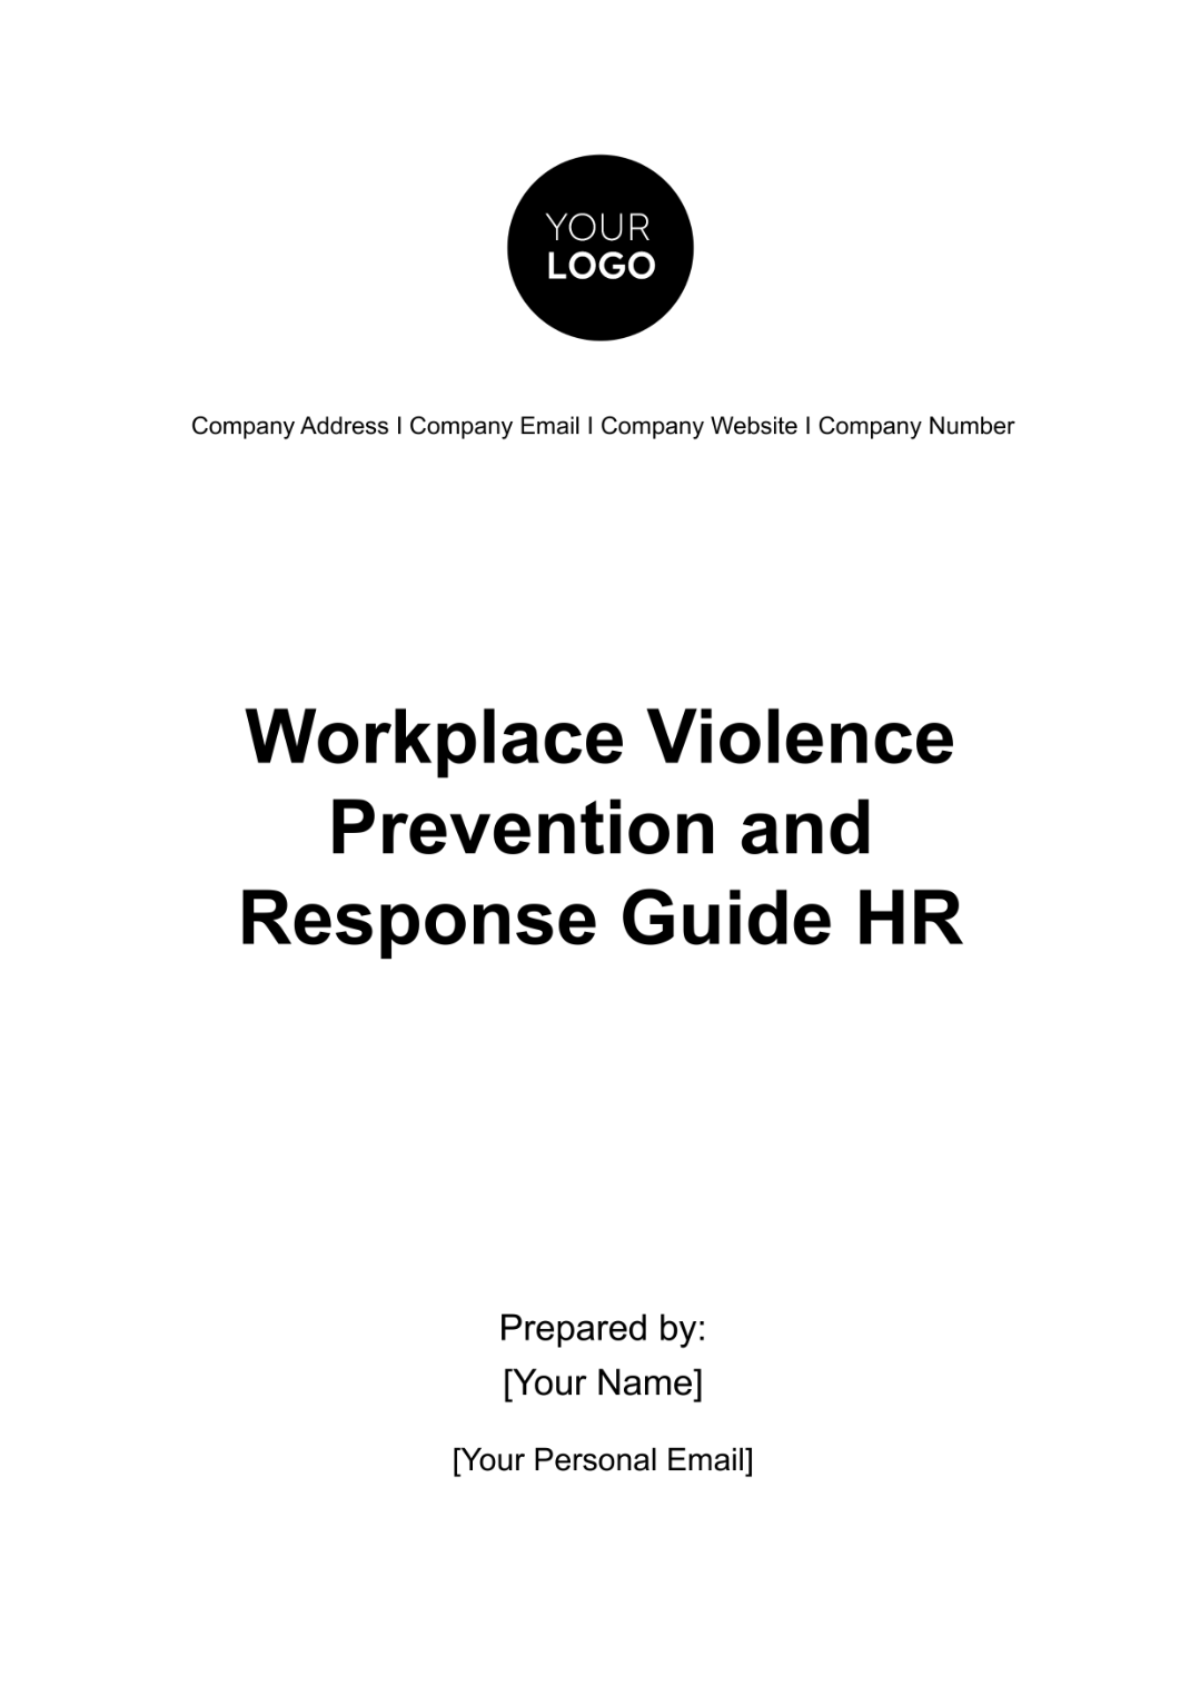 Free Workplace Violence Prevention and Response Guide HR Template